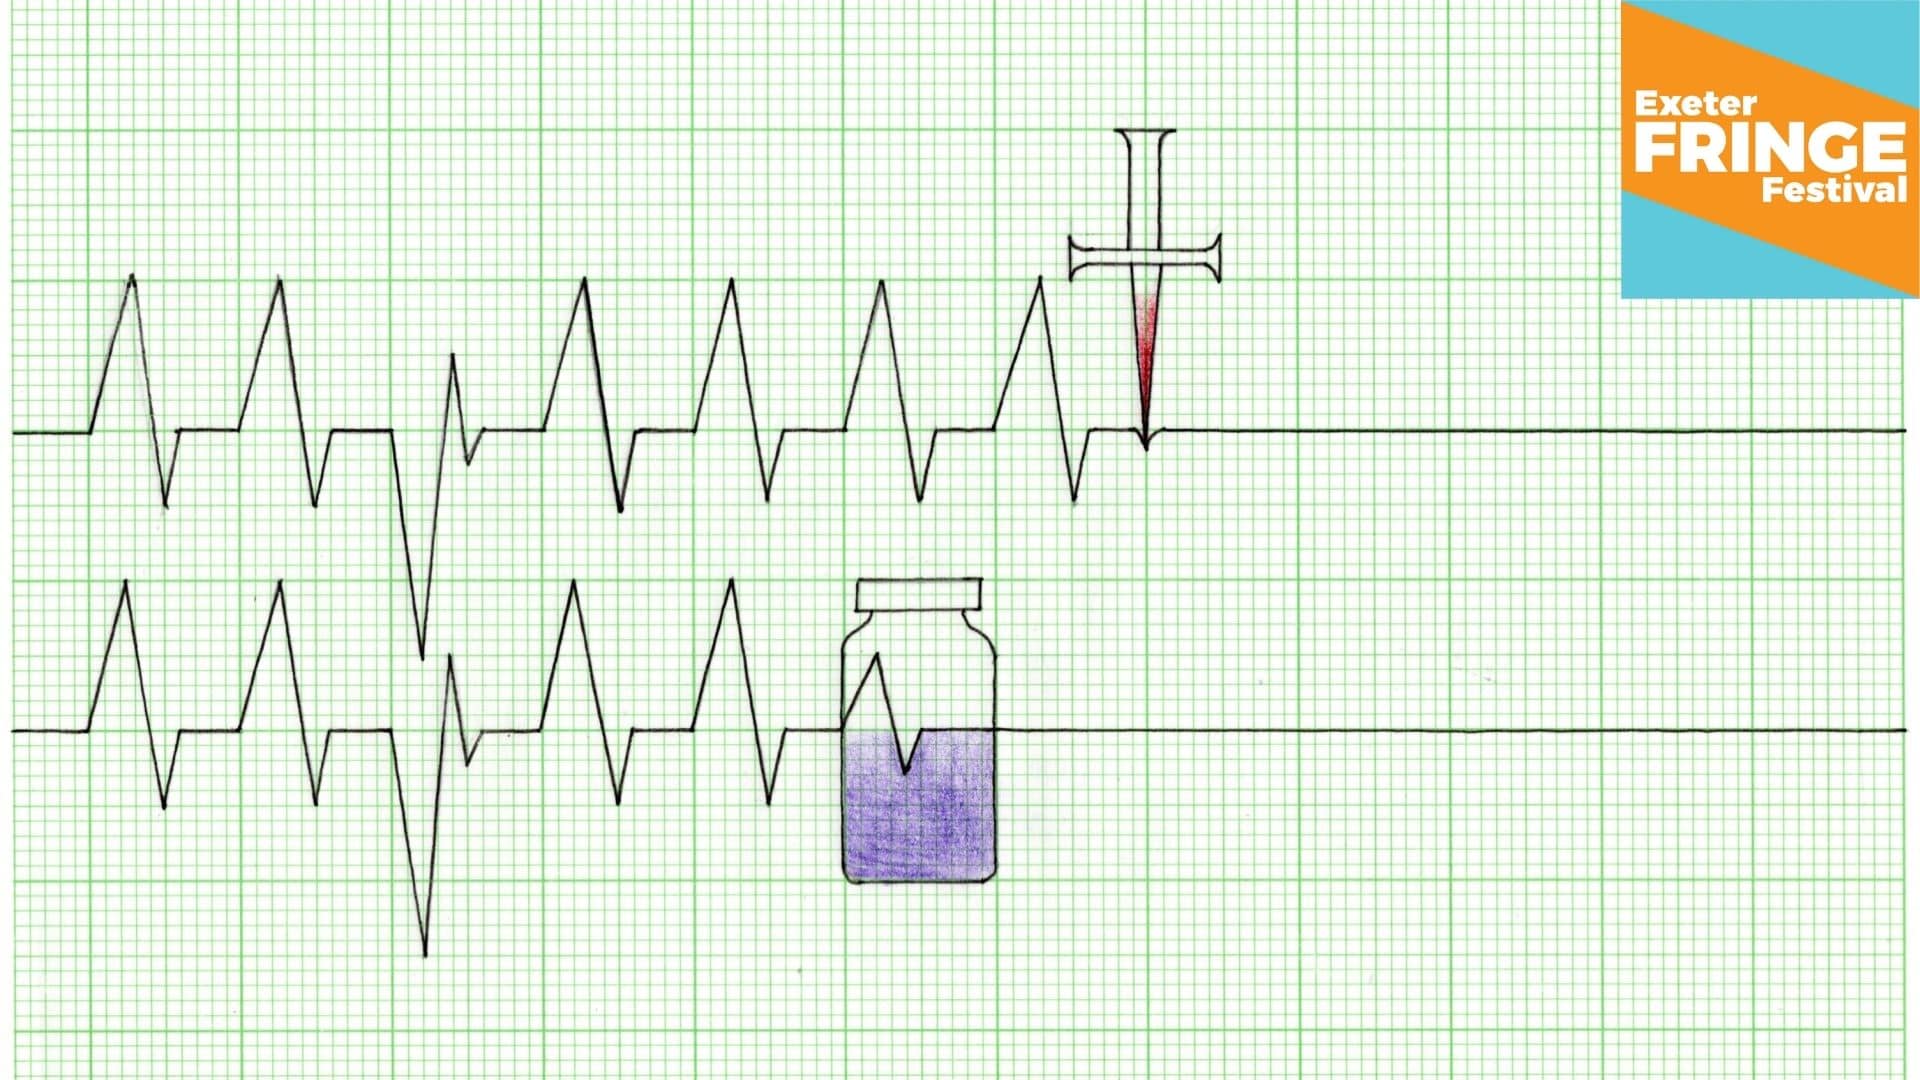 Promotional image for Romeo and Juliet - two ECG graphs beating perfectly in sync, one interrupted by a vial of something purple, the other just after by a bloody dagger